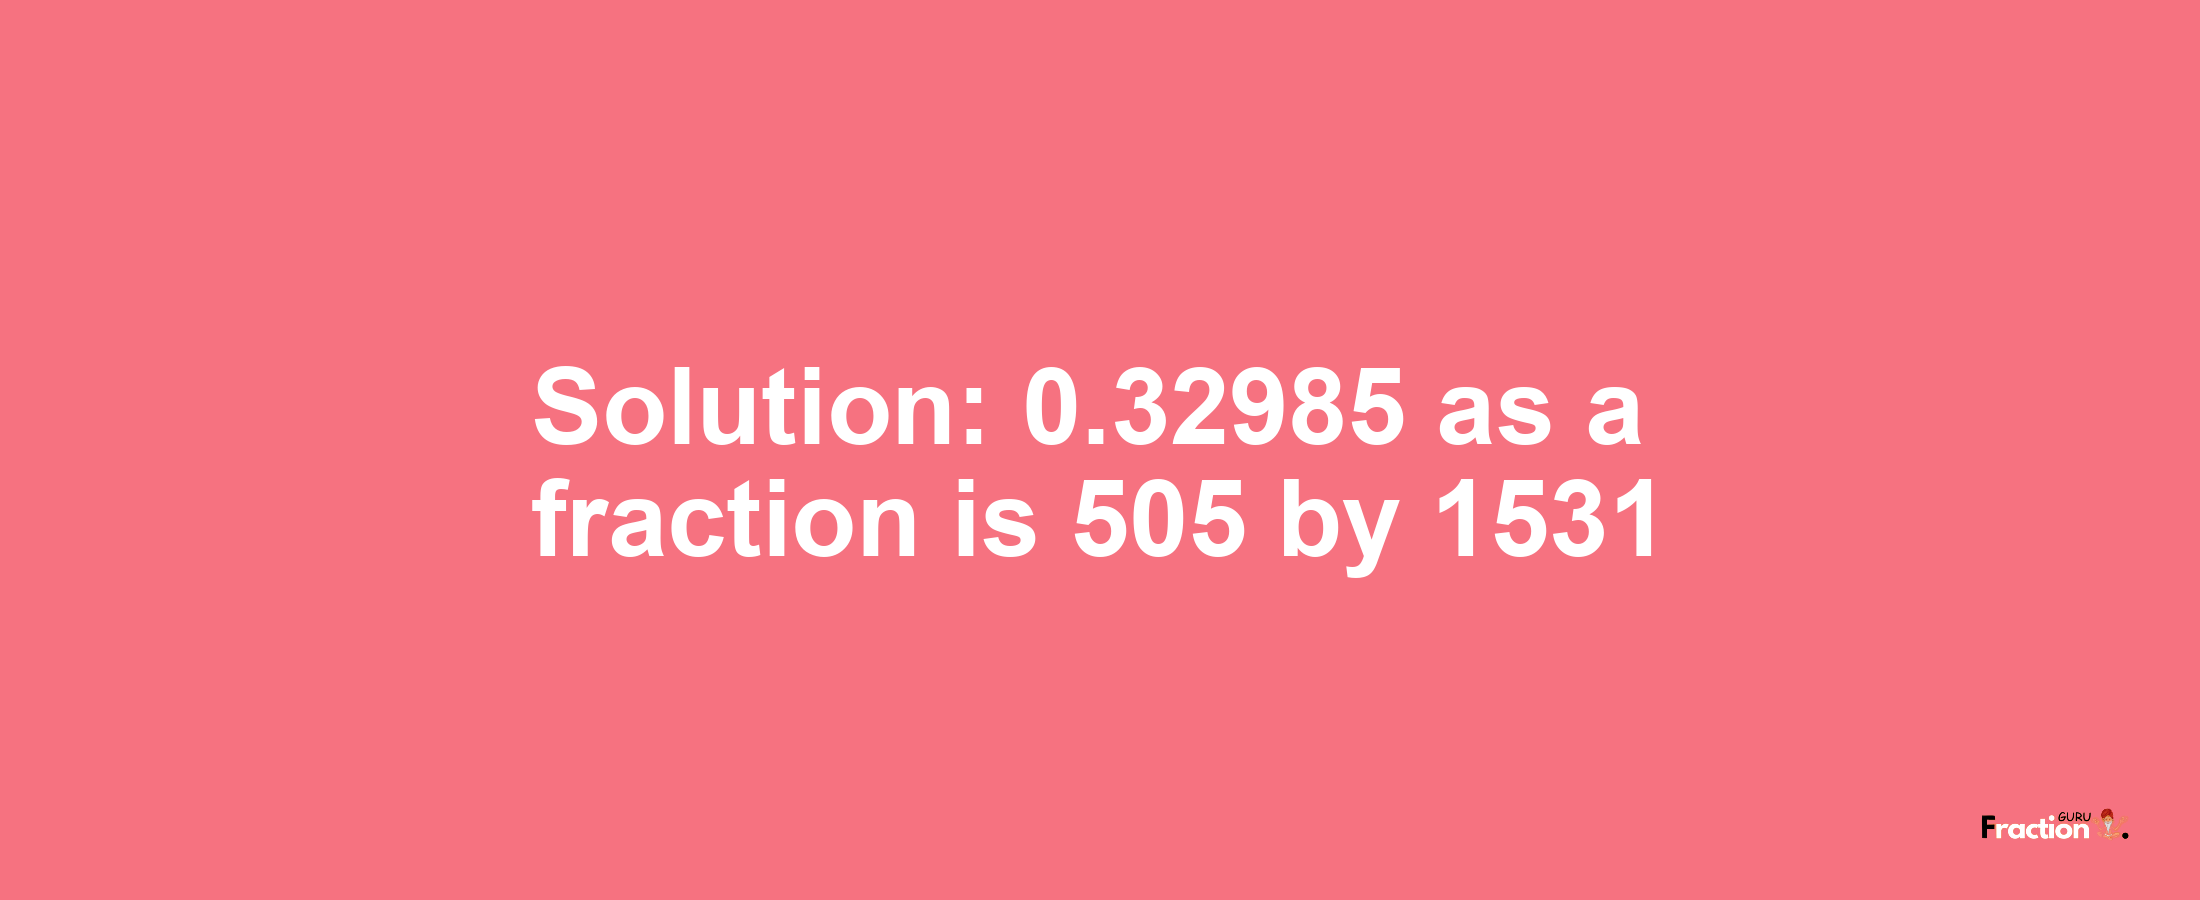 Solution:0.32985 as a fraction is 505/1531